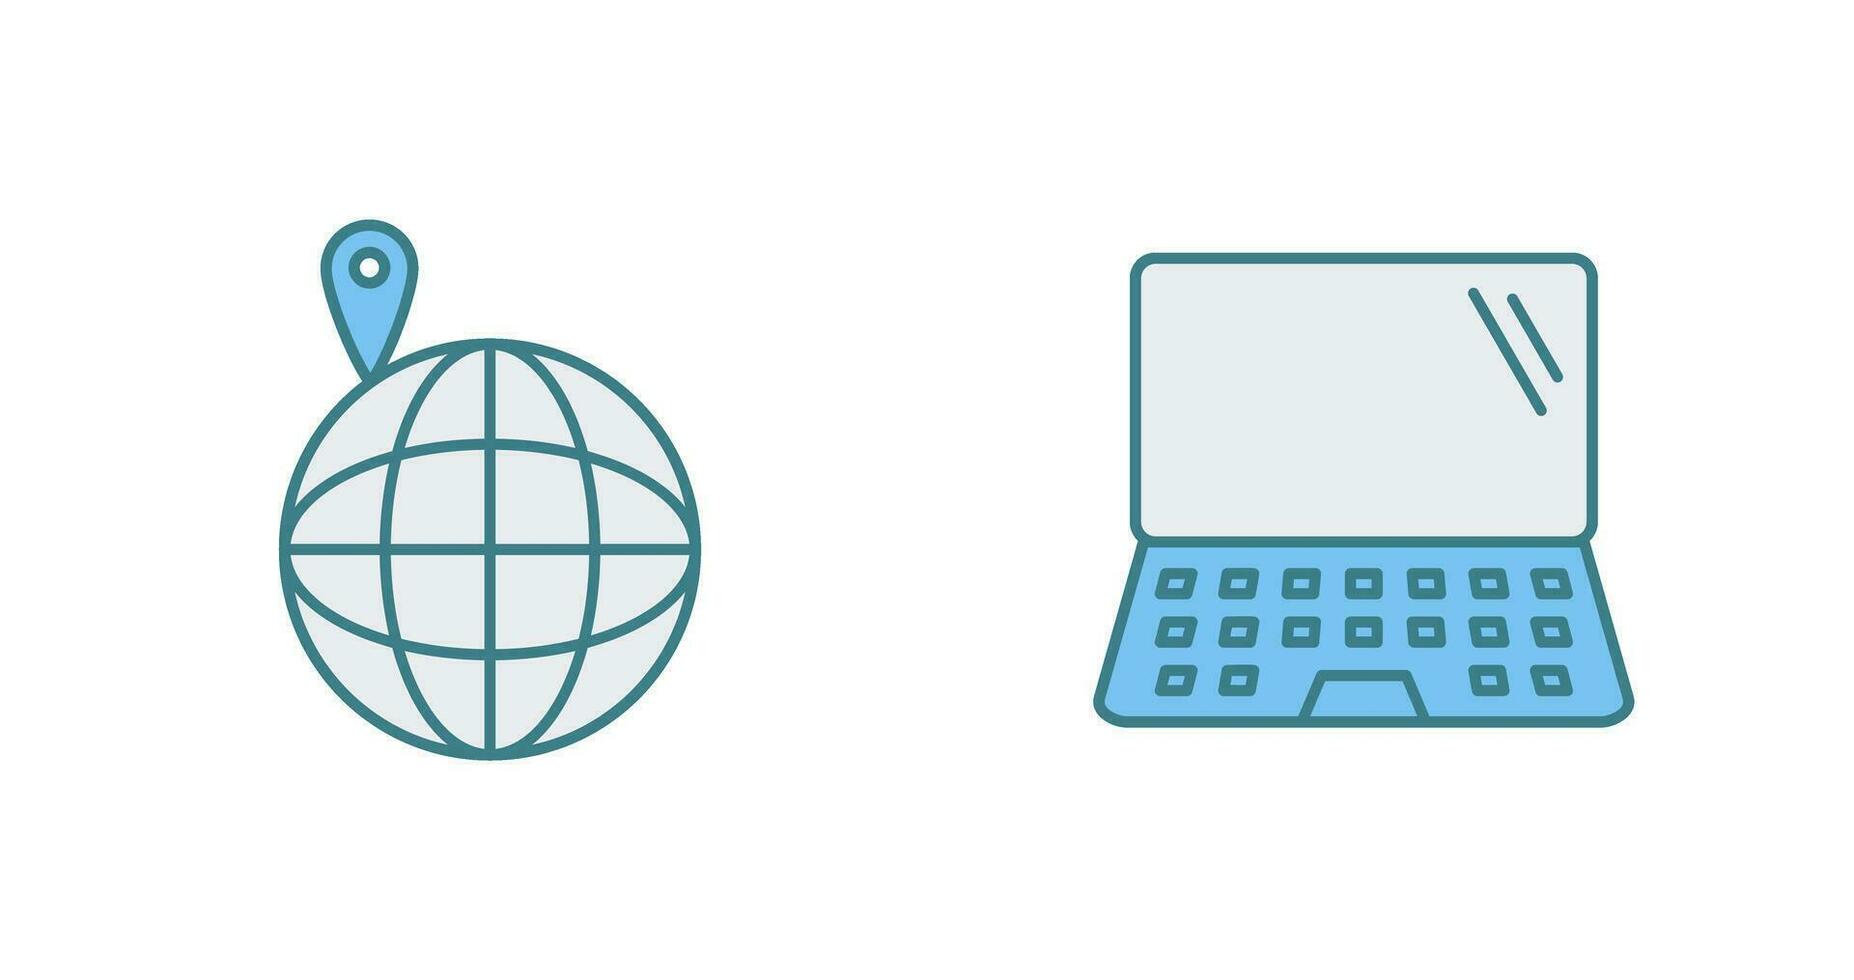 laptop and vacation spots  Icon vector